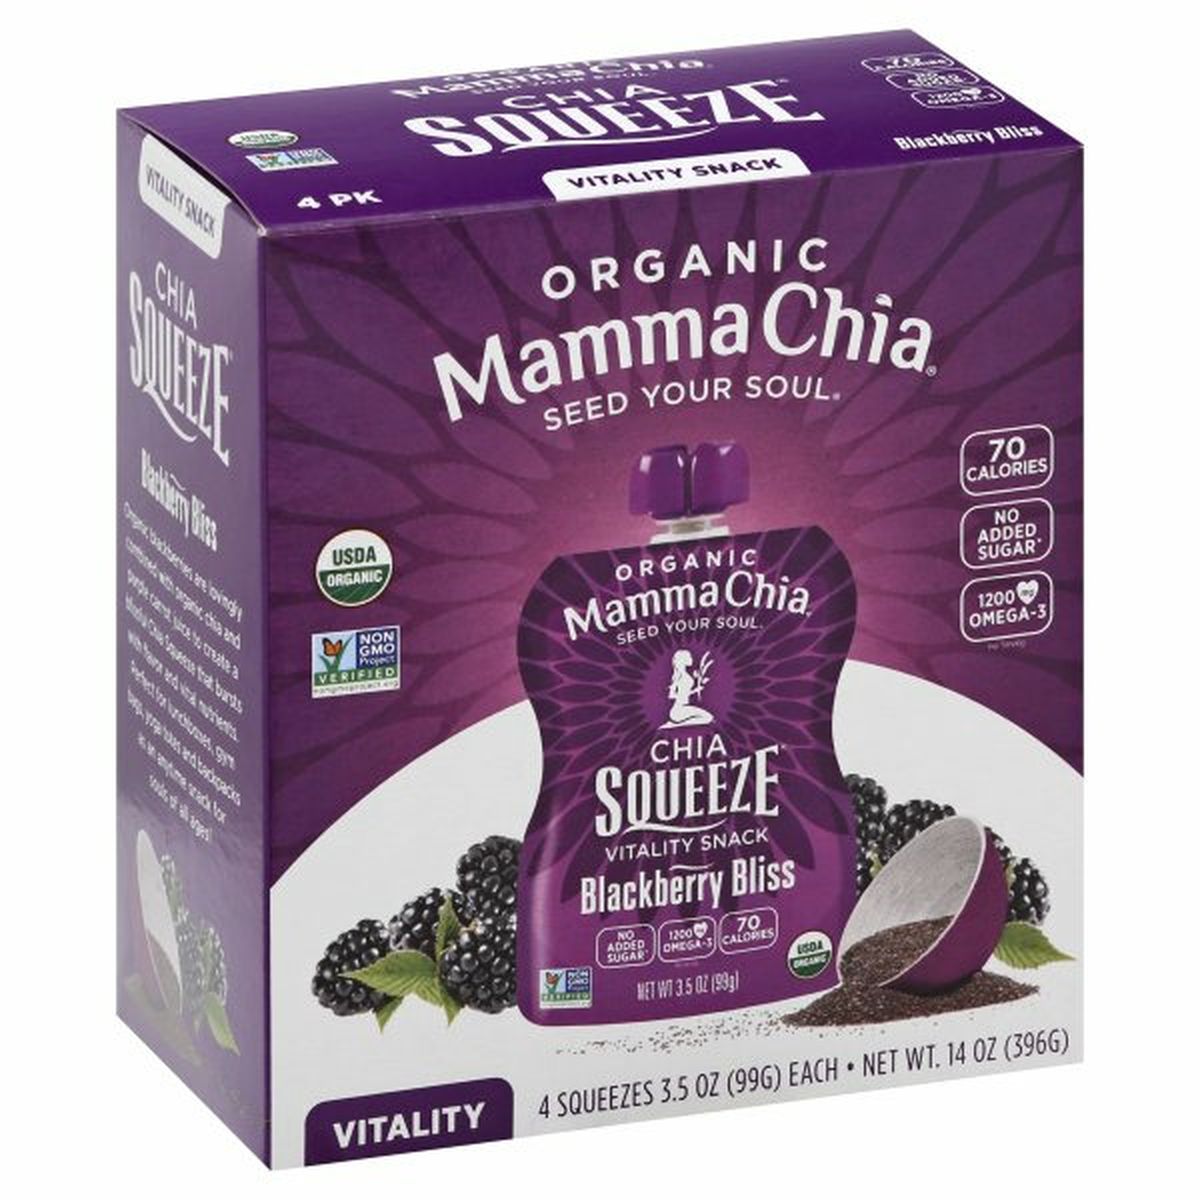 Calories in Mamma Chia Chia Squeeze Vitality Snack, Organic, Blackberry Bliss